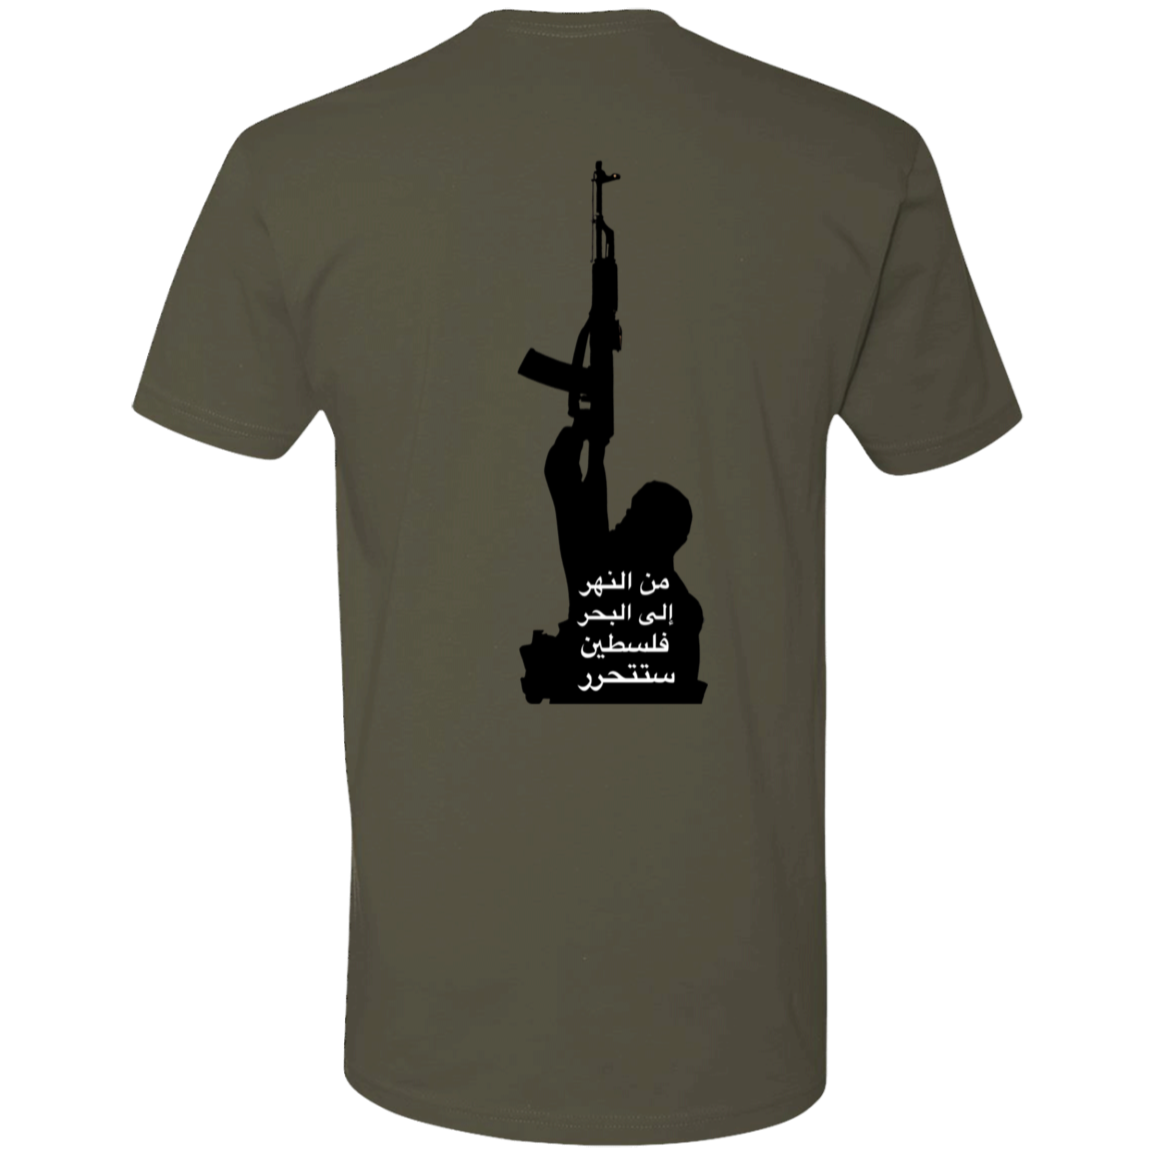 From the River to the Sea Palestine Resistance Tshirt